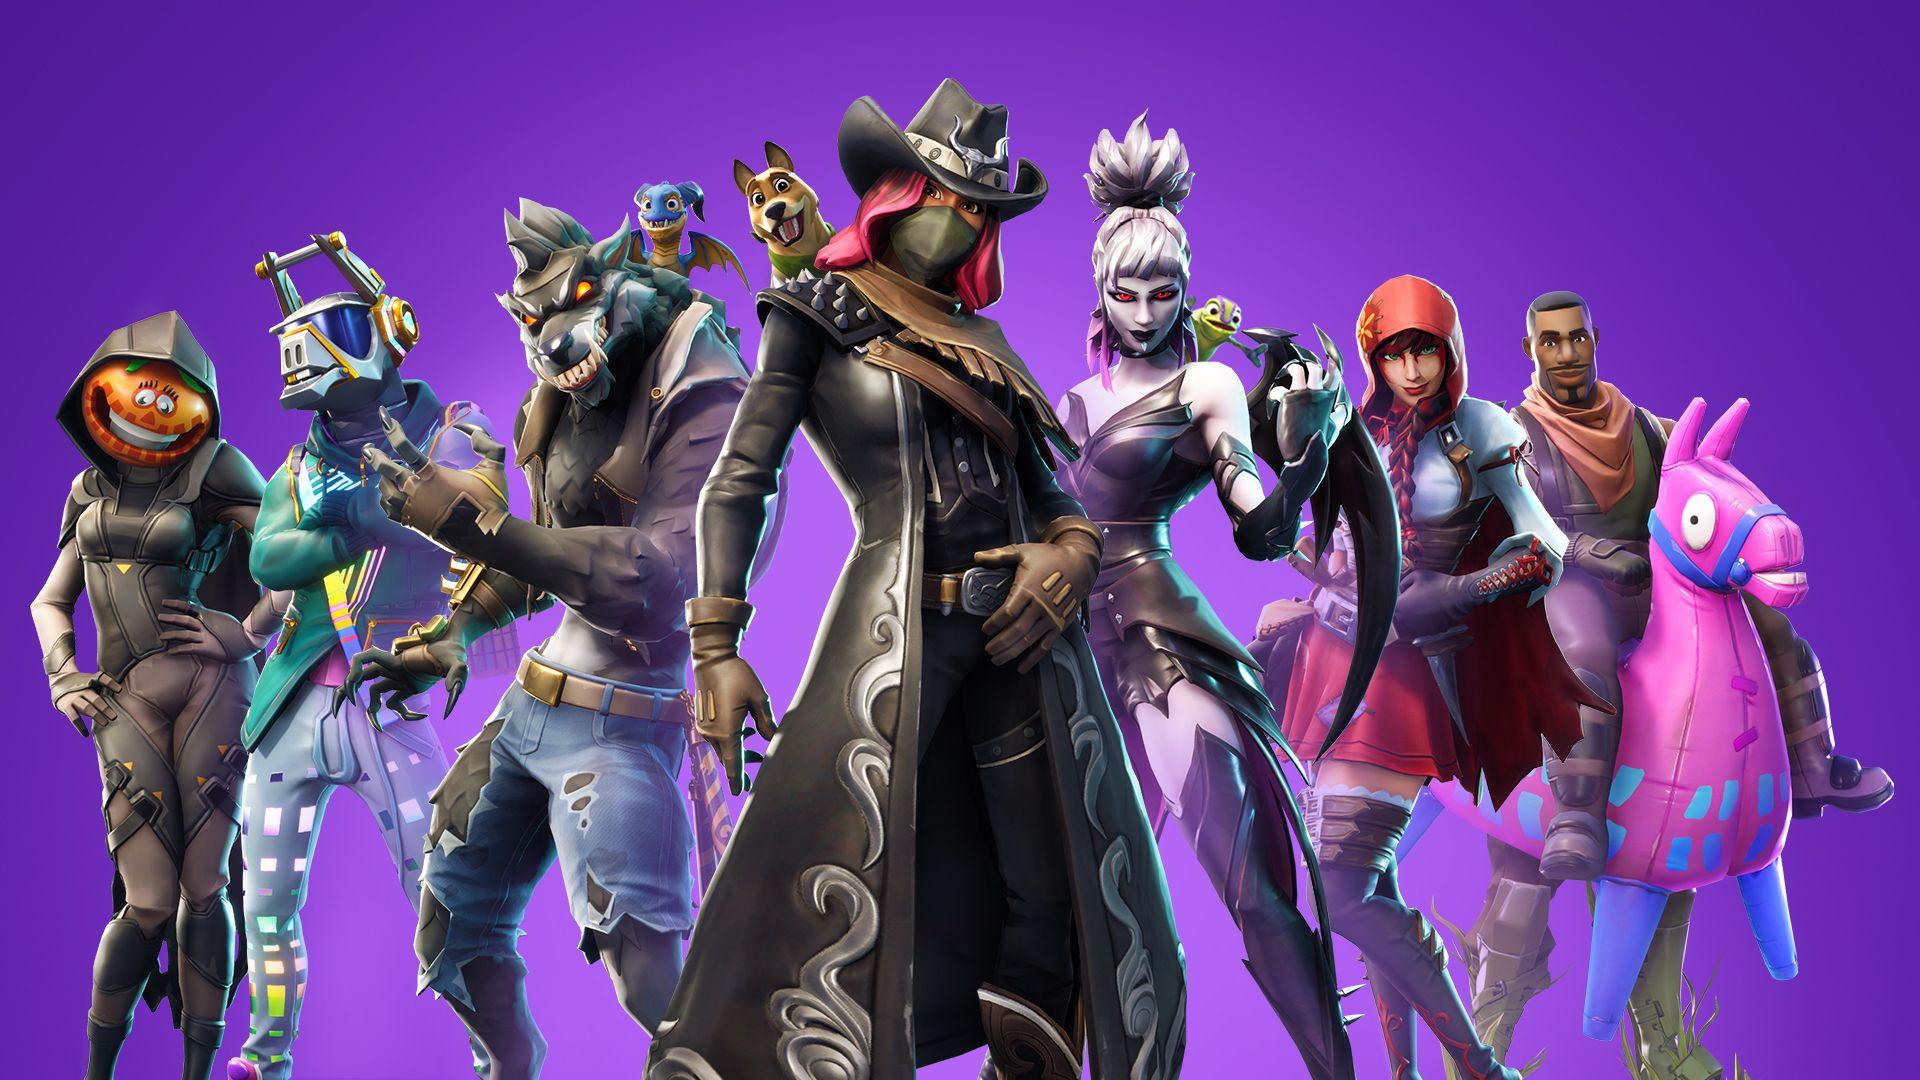 Fortnite' Gets Spooky For Season 6 With Horror Based Skins And More